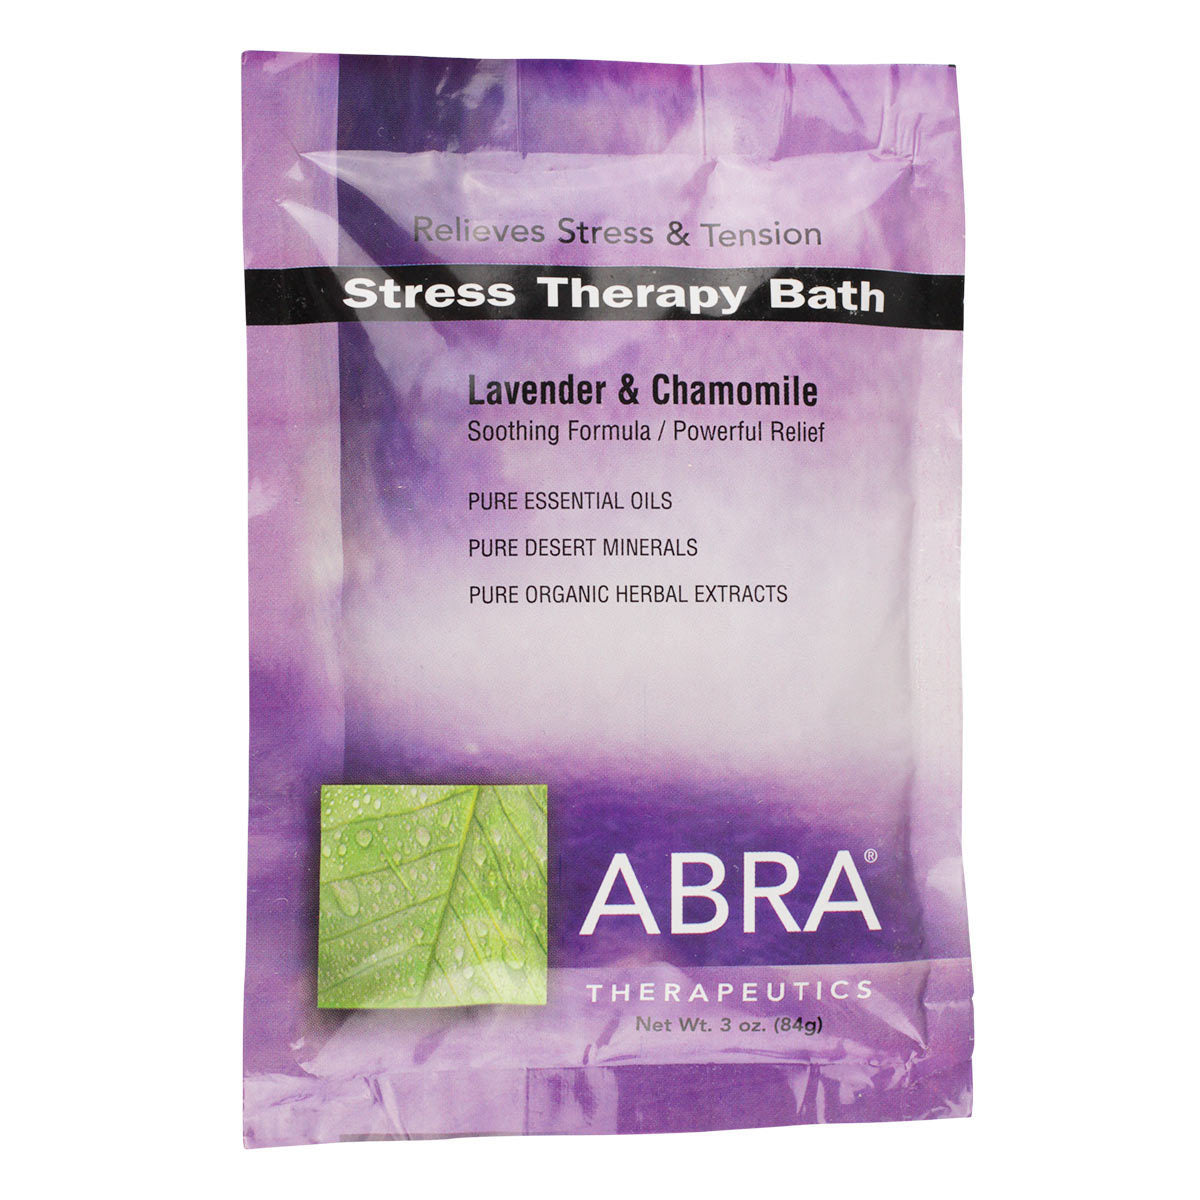 Primary image of Stress Therapy (Lavender + Chamomile) Bath Salt